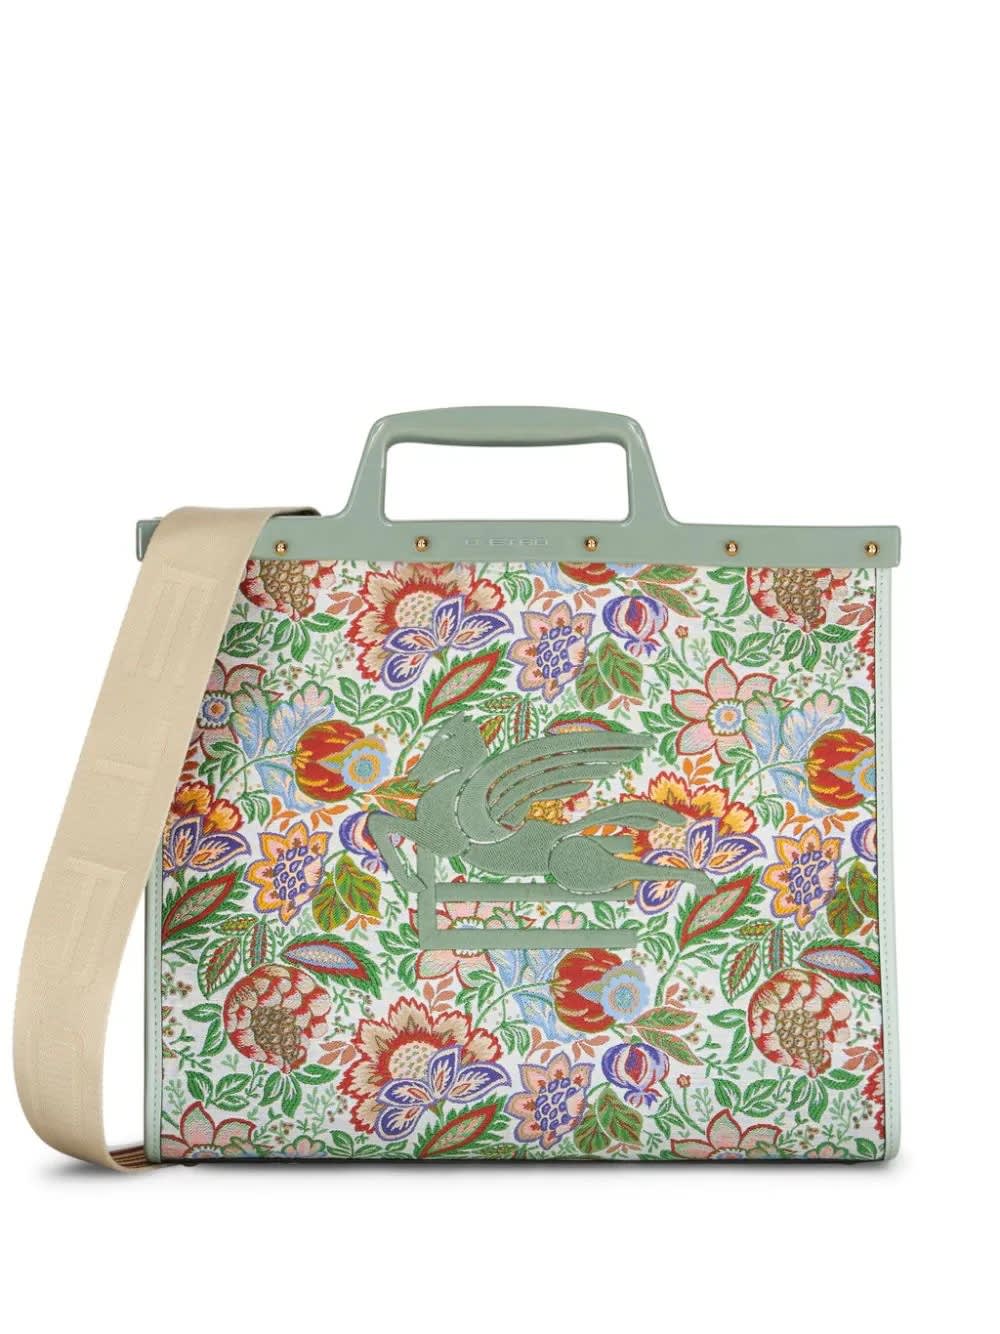 Etro Floral Jacquard Large Love Trotter Shopping Bag In Green